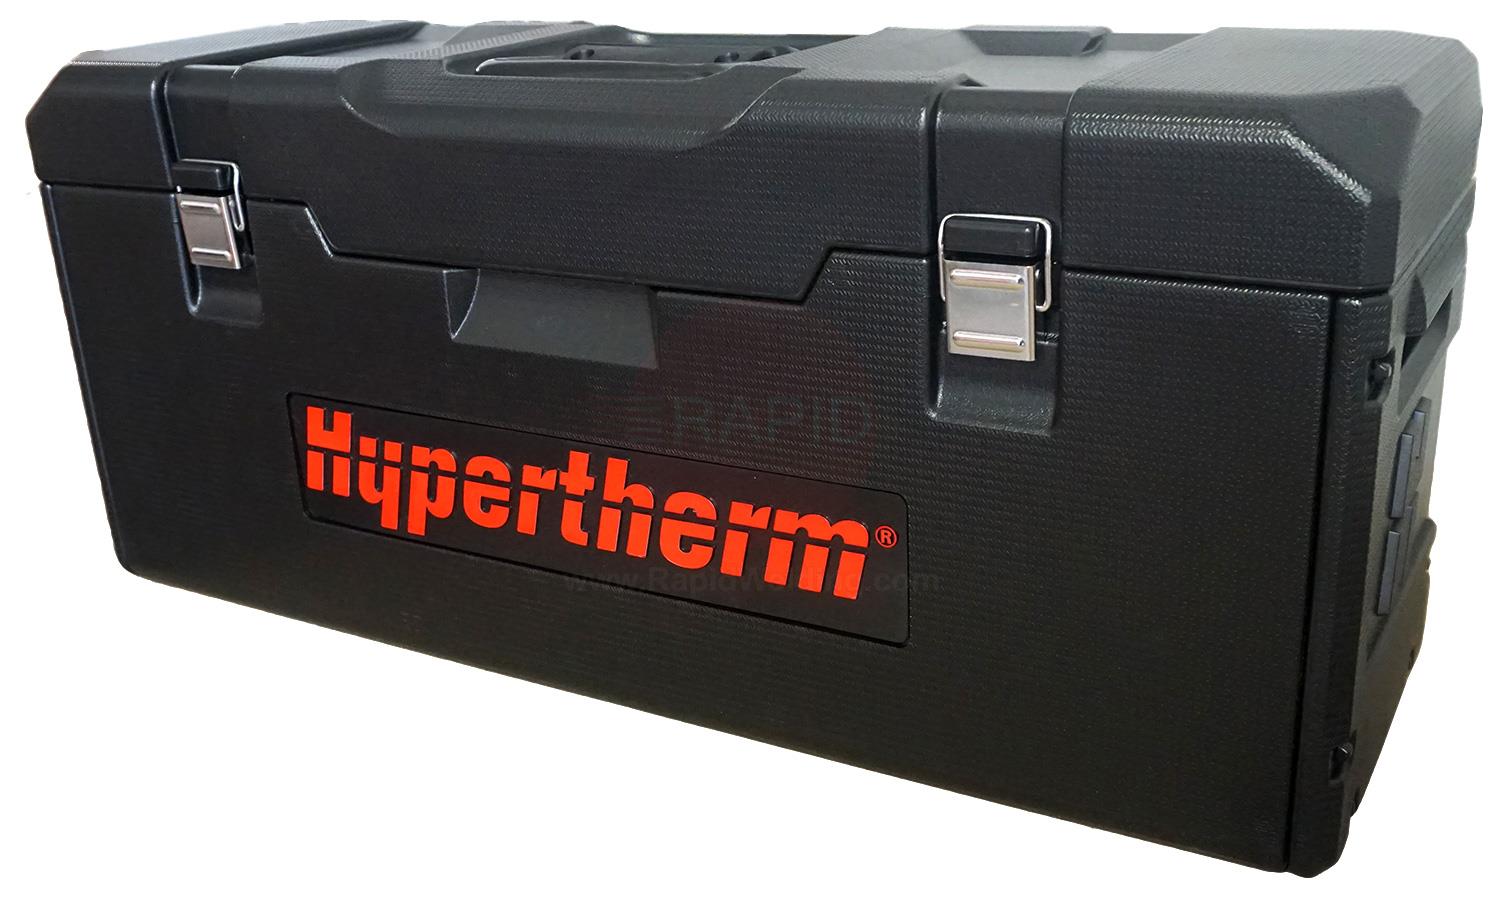 088083  Hypertherm Powermax 30 XP Plasma Cutter with 4.5m Torch & Case, Dual Voltage 110v & 240v CE